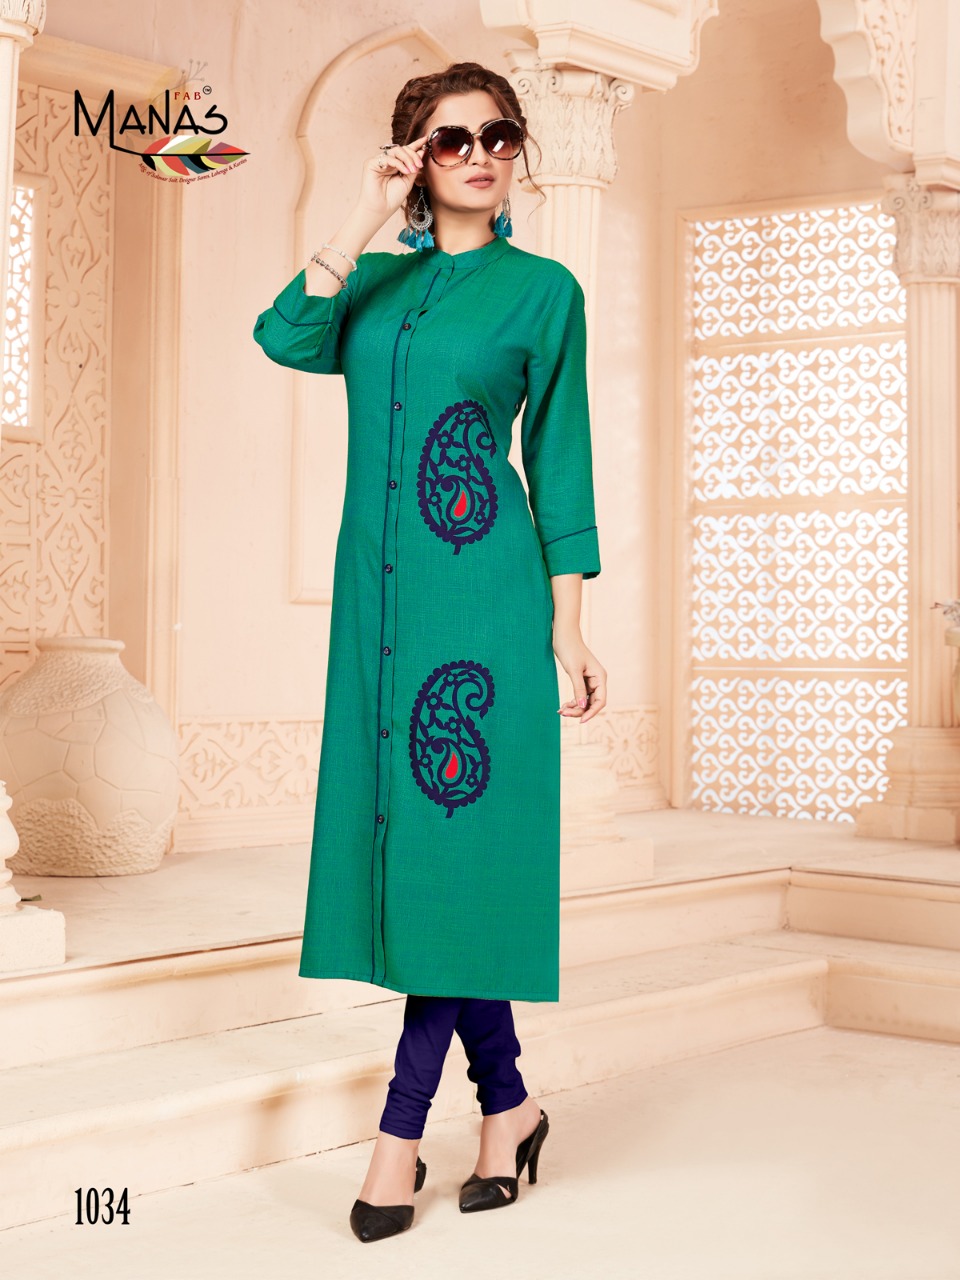 manas priyal vol 5 colorful fancy ready to wear kurtis collection at reasonable rate